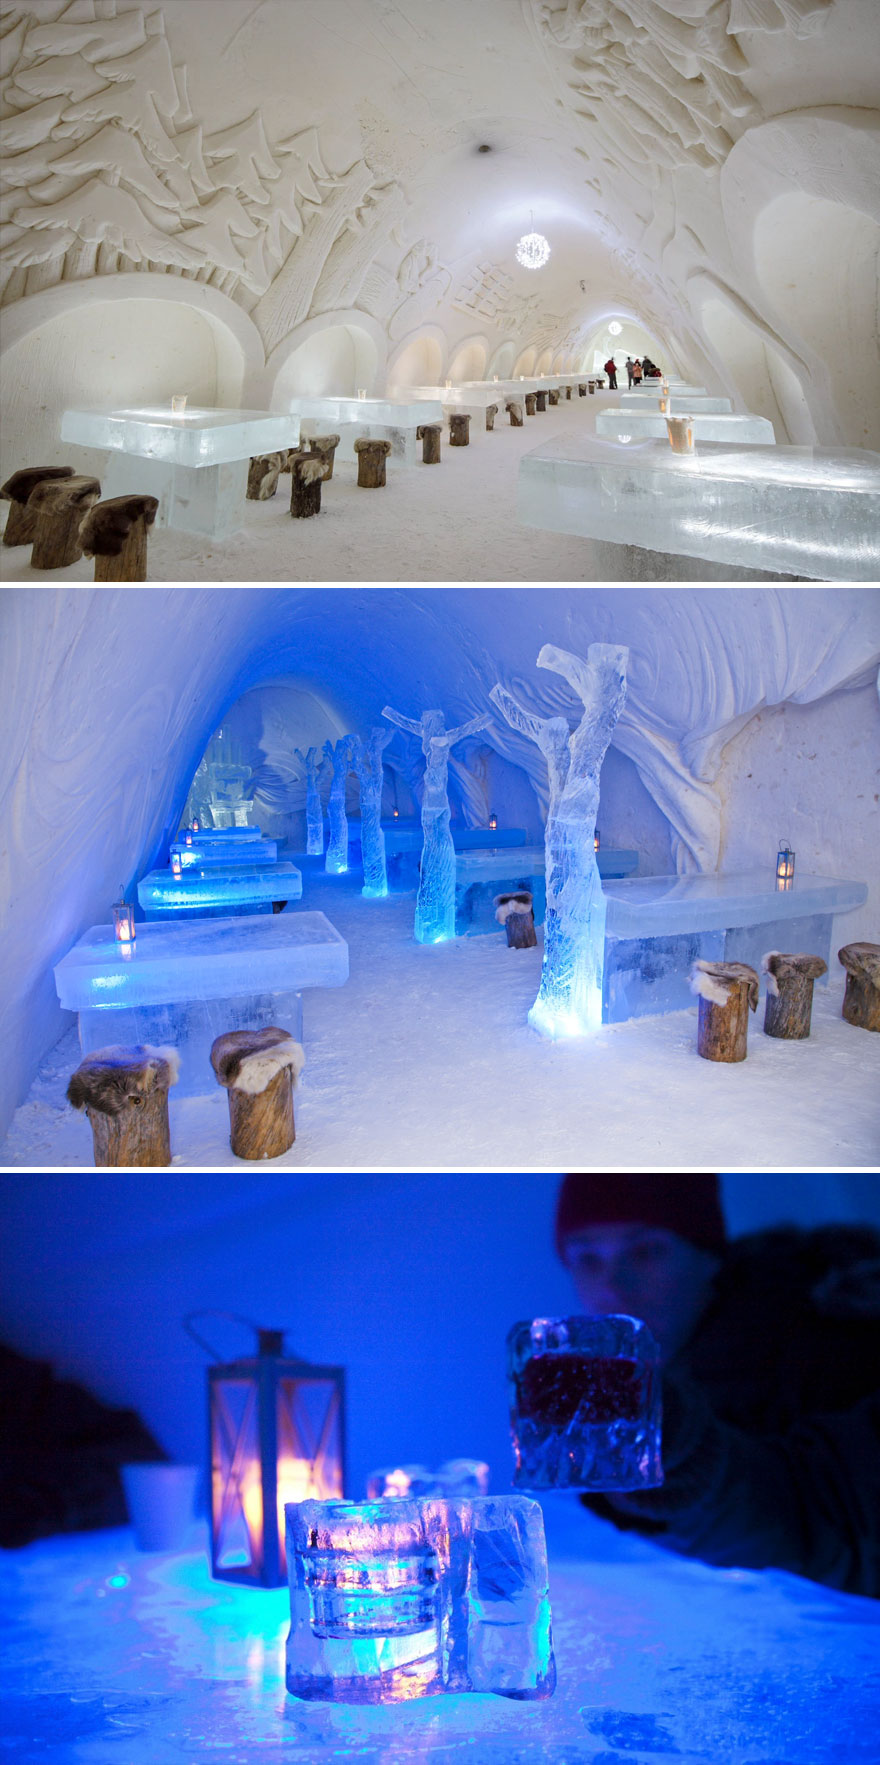 Dine Surrounded By Snow And Ice, The Snowcastle Of Kemi, Kemi, Finland